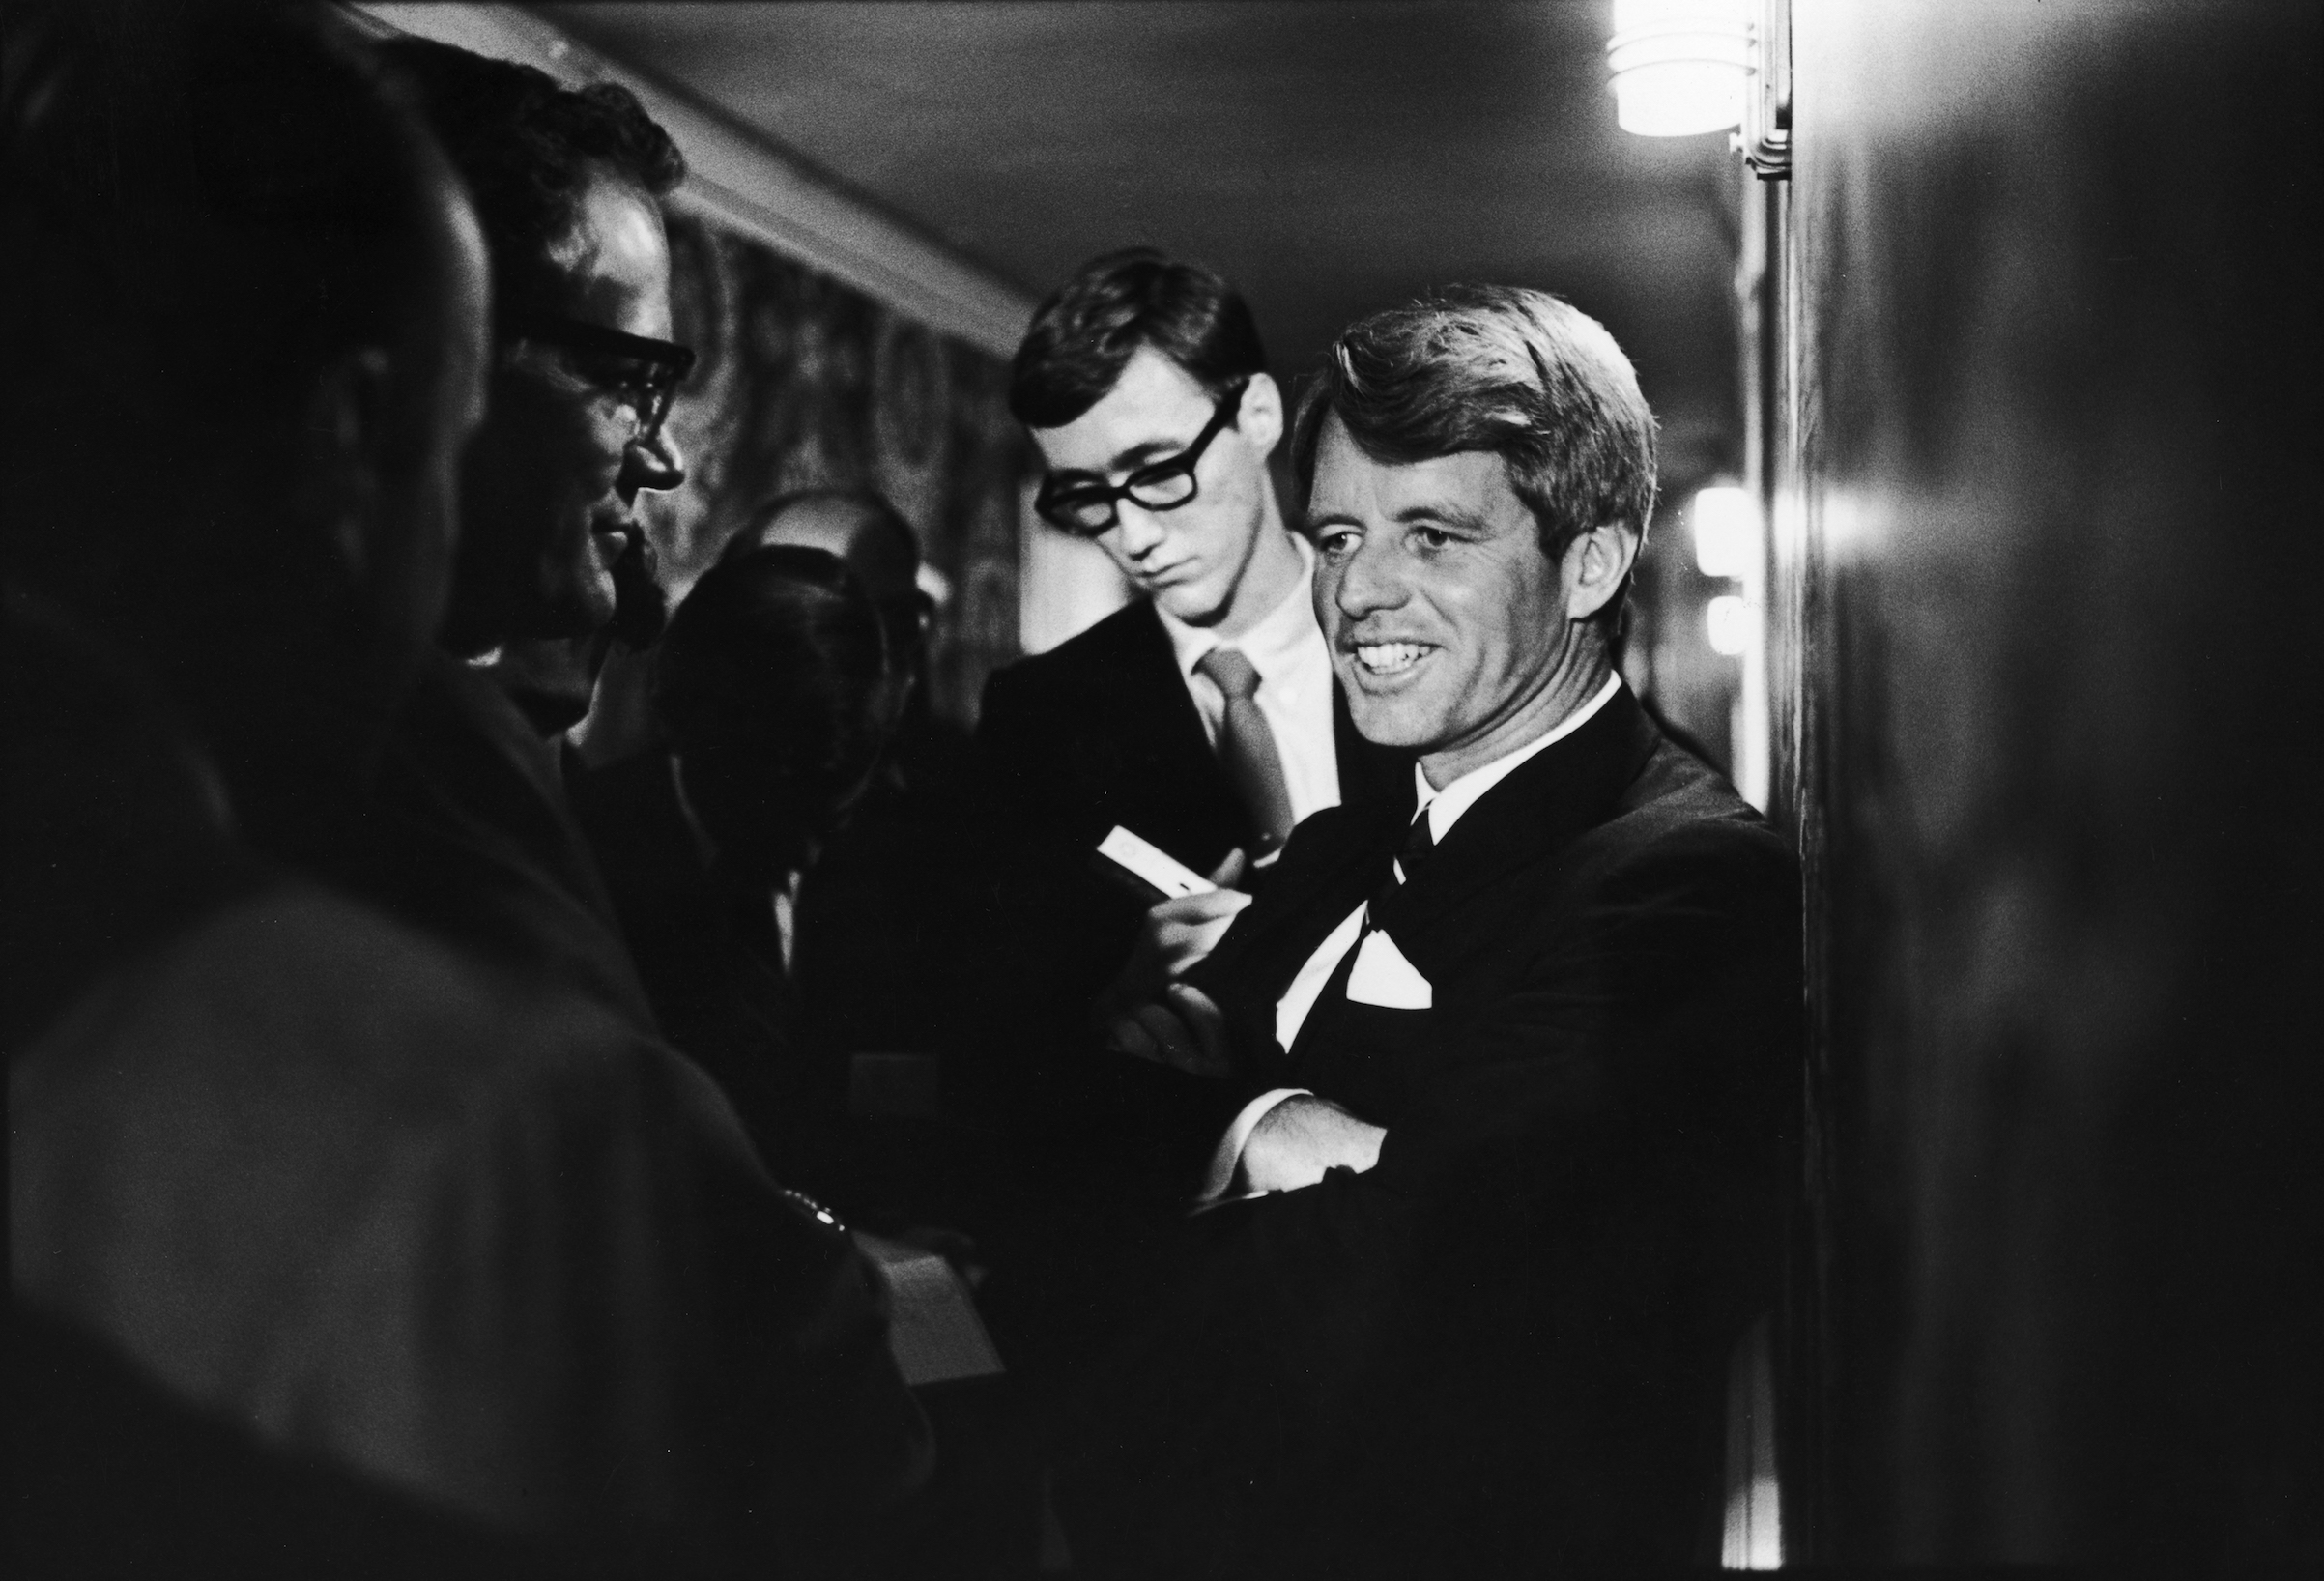 Robert Kennedy chats with reporters prior to his assassination at the Ambassador Hotel. Los Angeles, June 5, 1968 (Bill Eppridge—The LIFE Picture Collection/Getty Images)